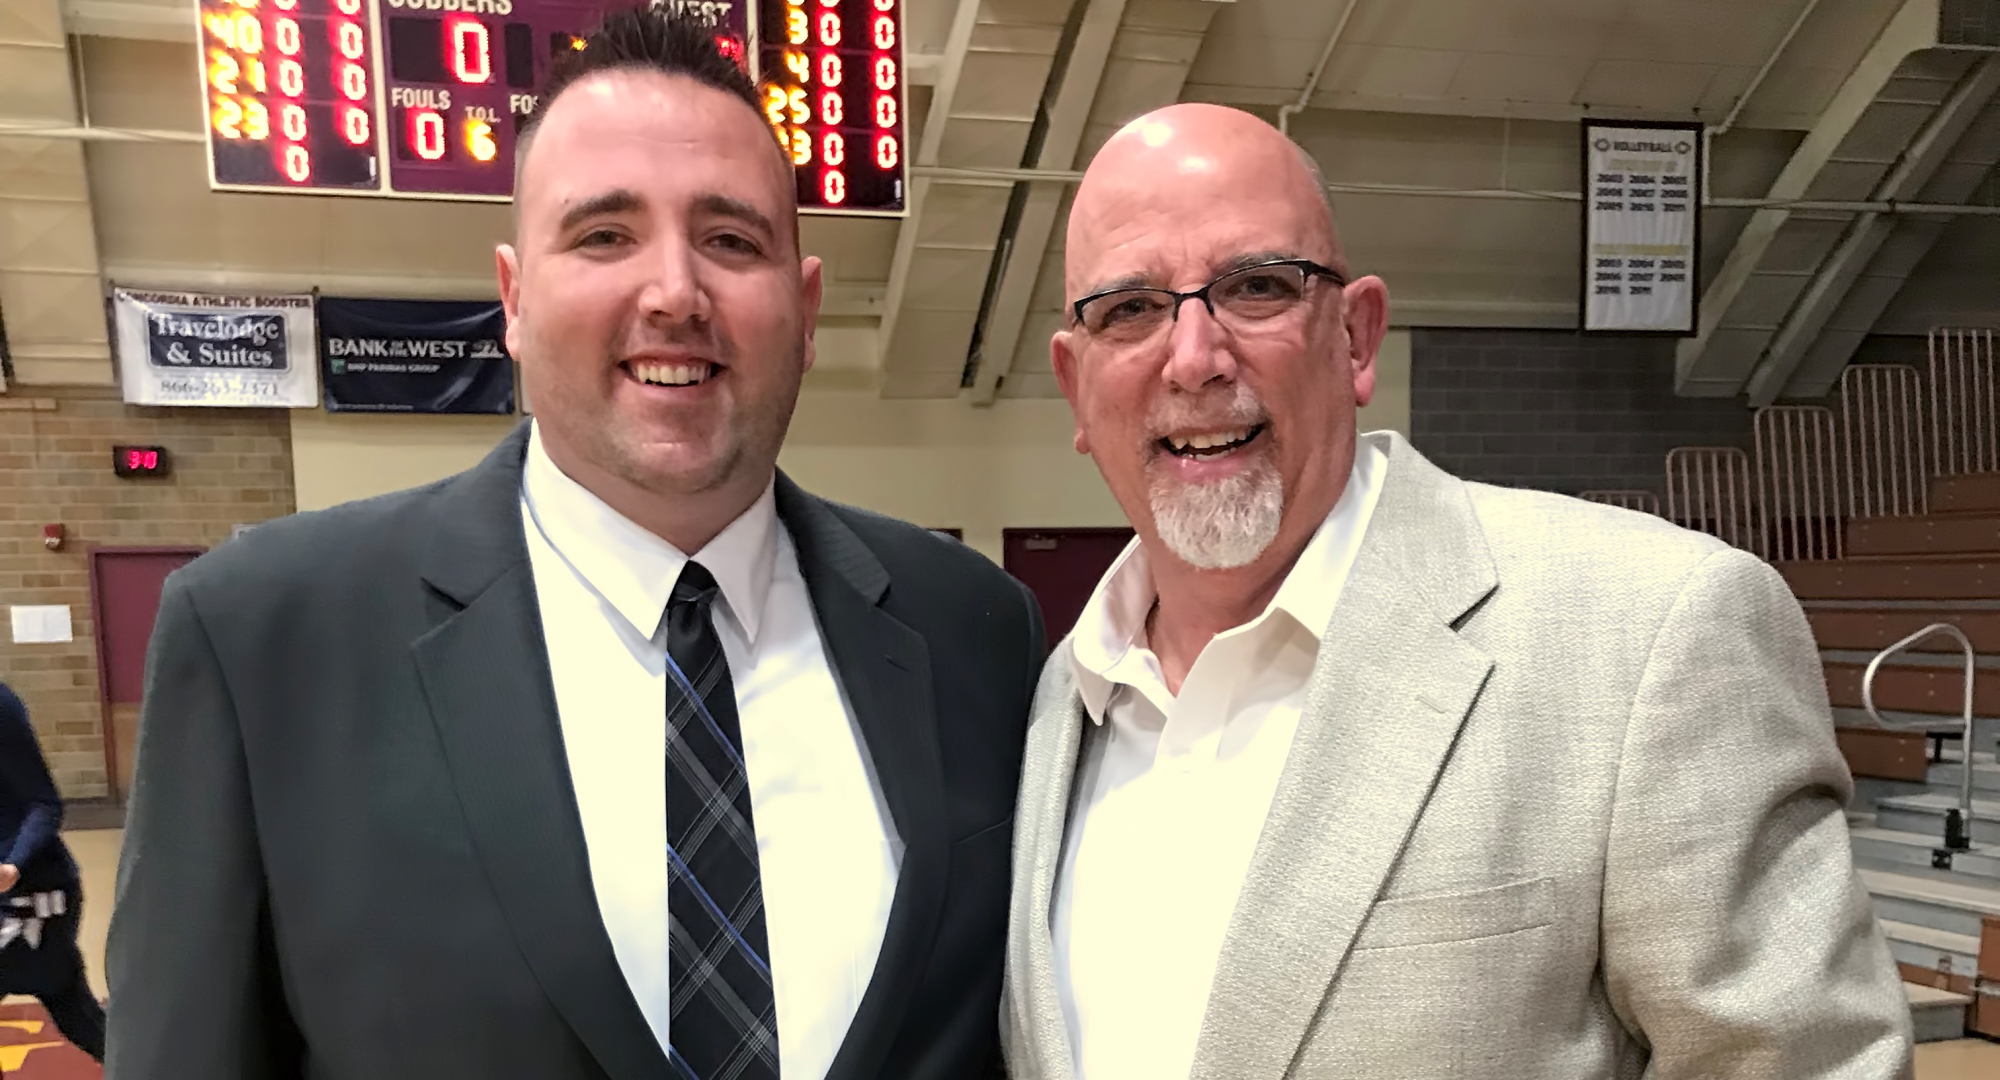 Cobber head coach Grant Hemmingsen (L) and his Dad George pose for a picture before Concordia's game with Bethel.